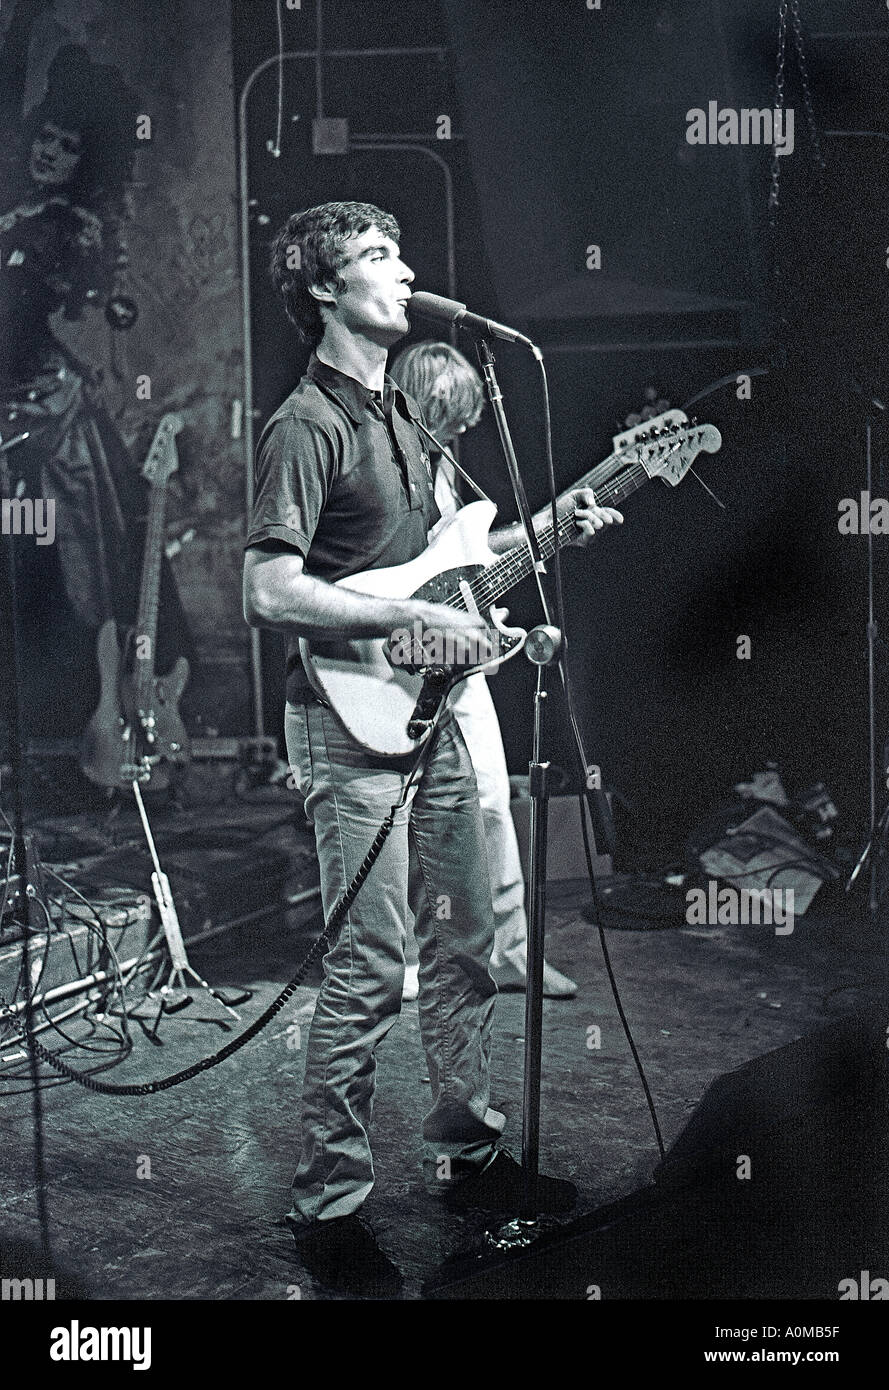 New Wave Music, New York, NY, USA 'The Talking Heads' Rock Band Playing in CBGB's Nightclub,  David Byrne, Rock Singer rock'n'roll, making music, Stock Photo